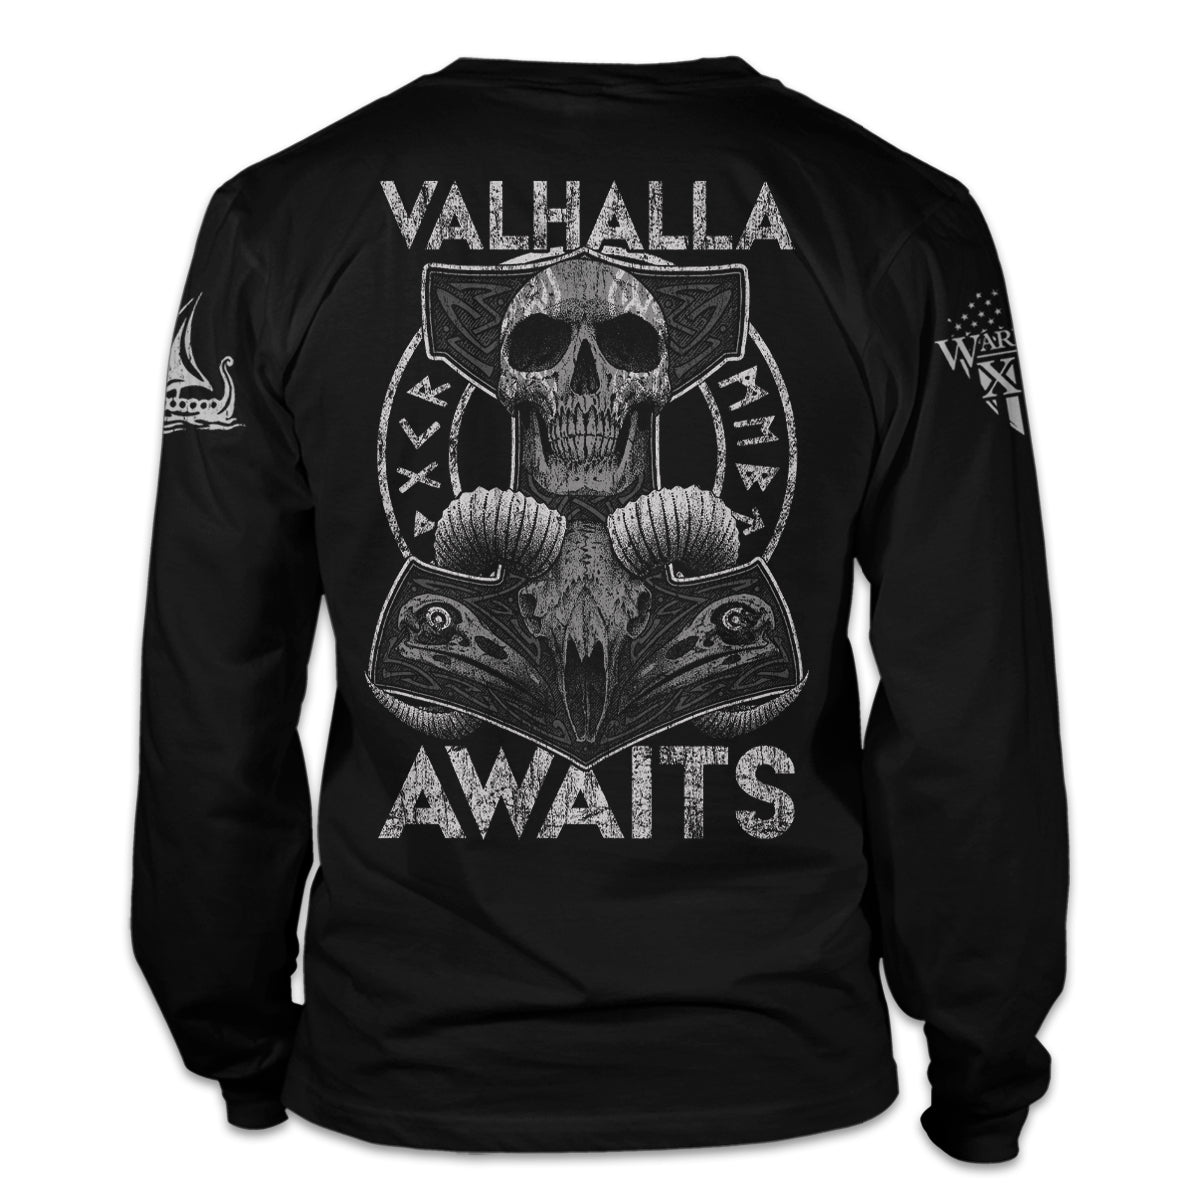 A black long sleeve shirt features a Thor's hammer skull design. The ram skull symbolizes the rams that pulled Thor's chariot.